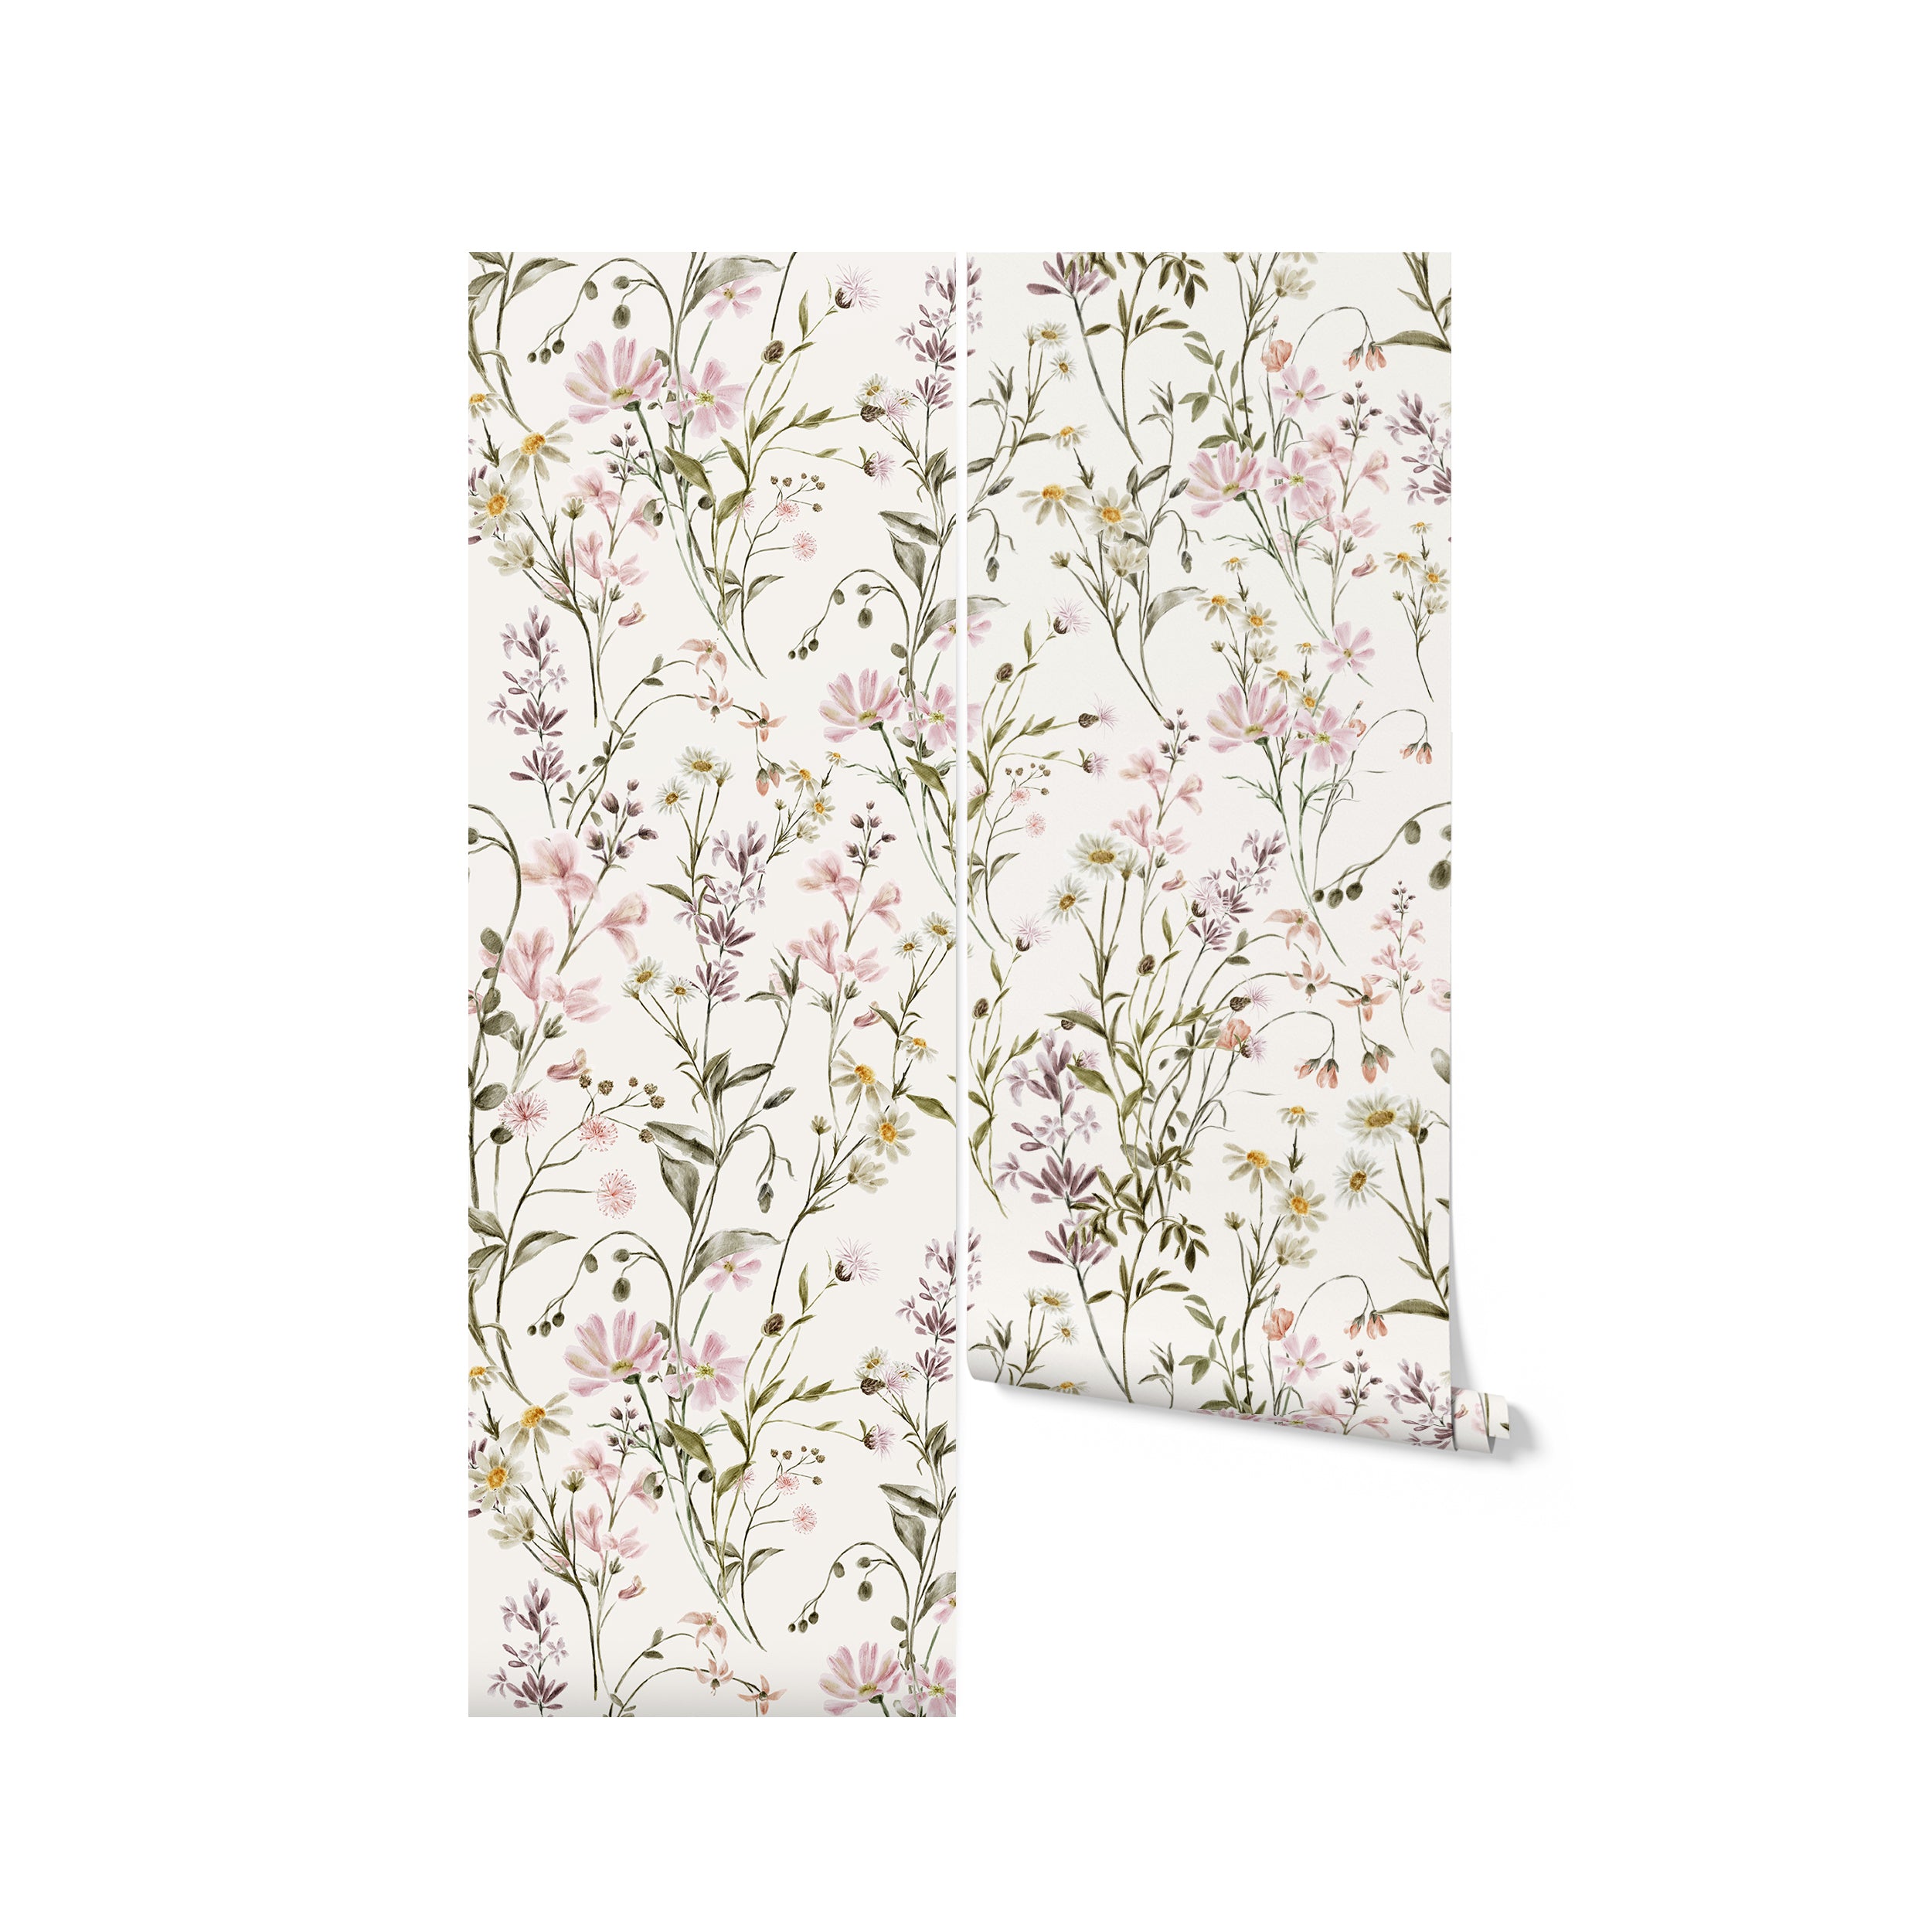 Sample of the WildFloral Wallpaper shown rolled halfway, featuring a detailed and artistic pattern of wildflowers in watercolor style. The pastel colors and intricate design of the flowers and leaves provide a soothing and organic aesthetic